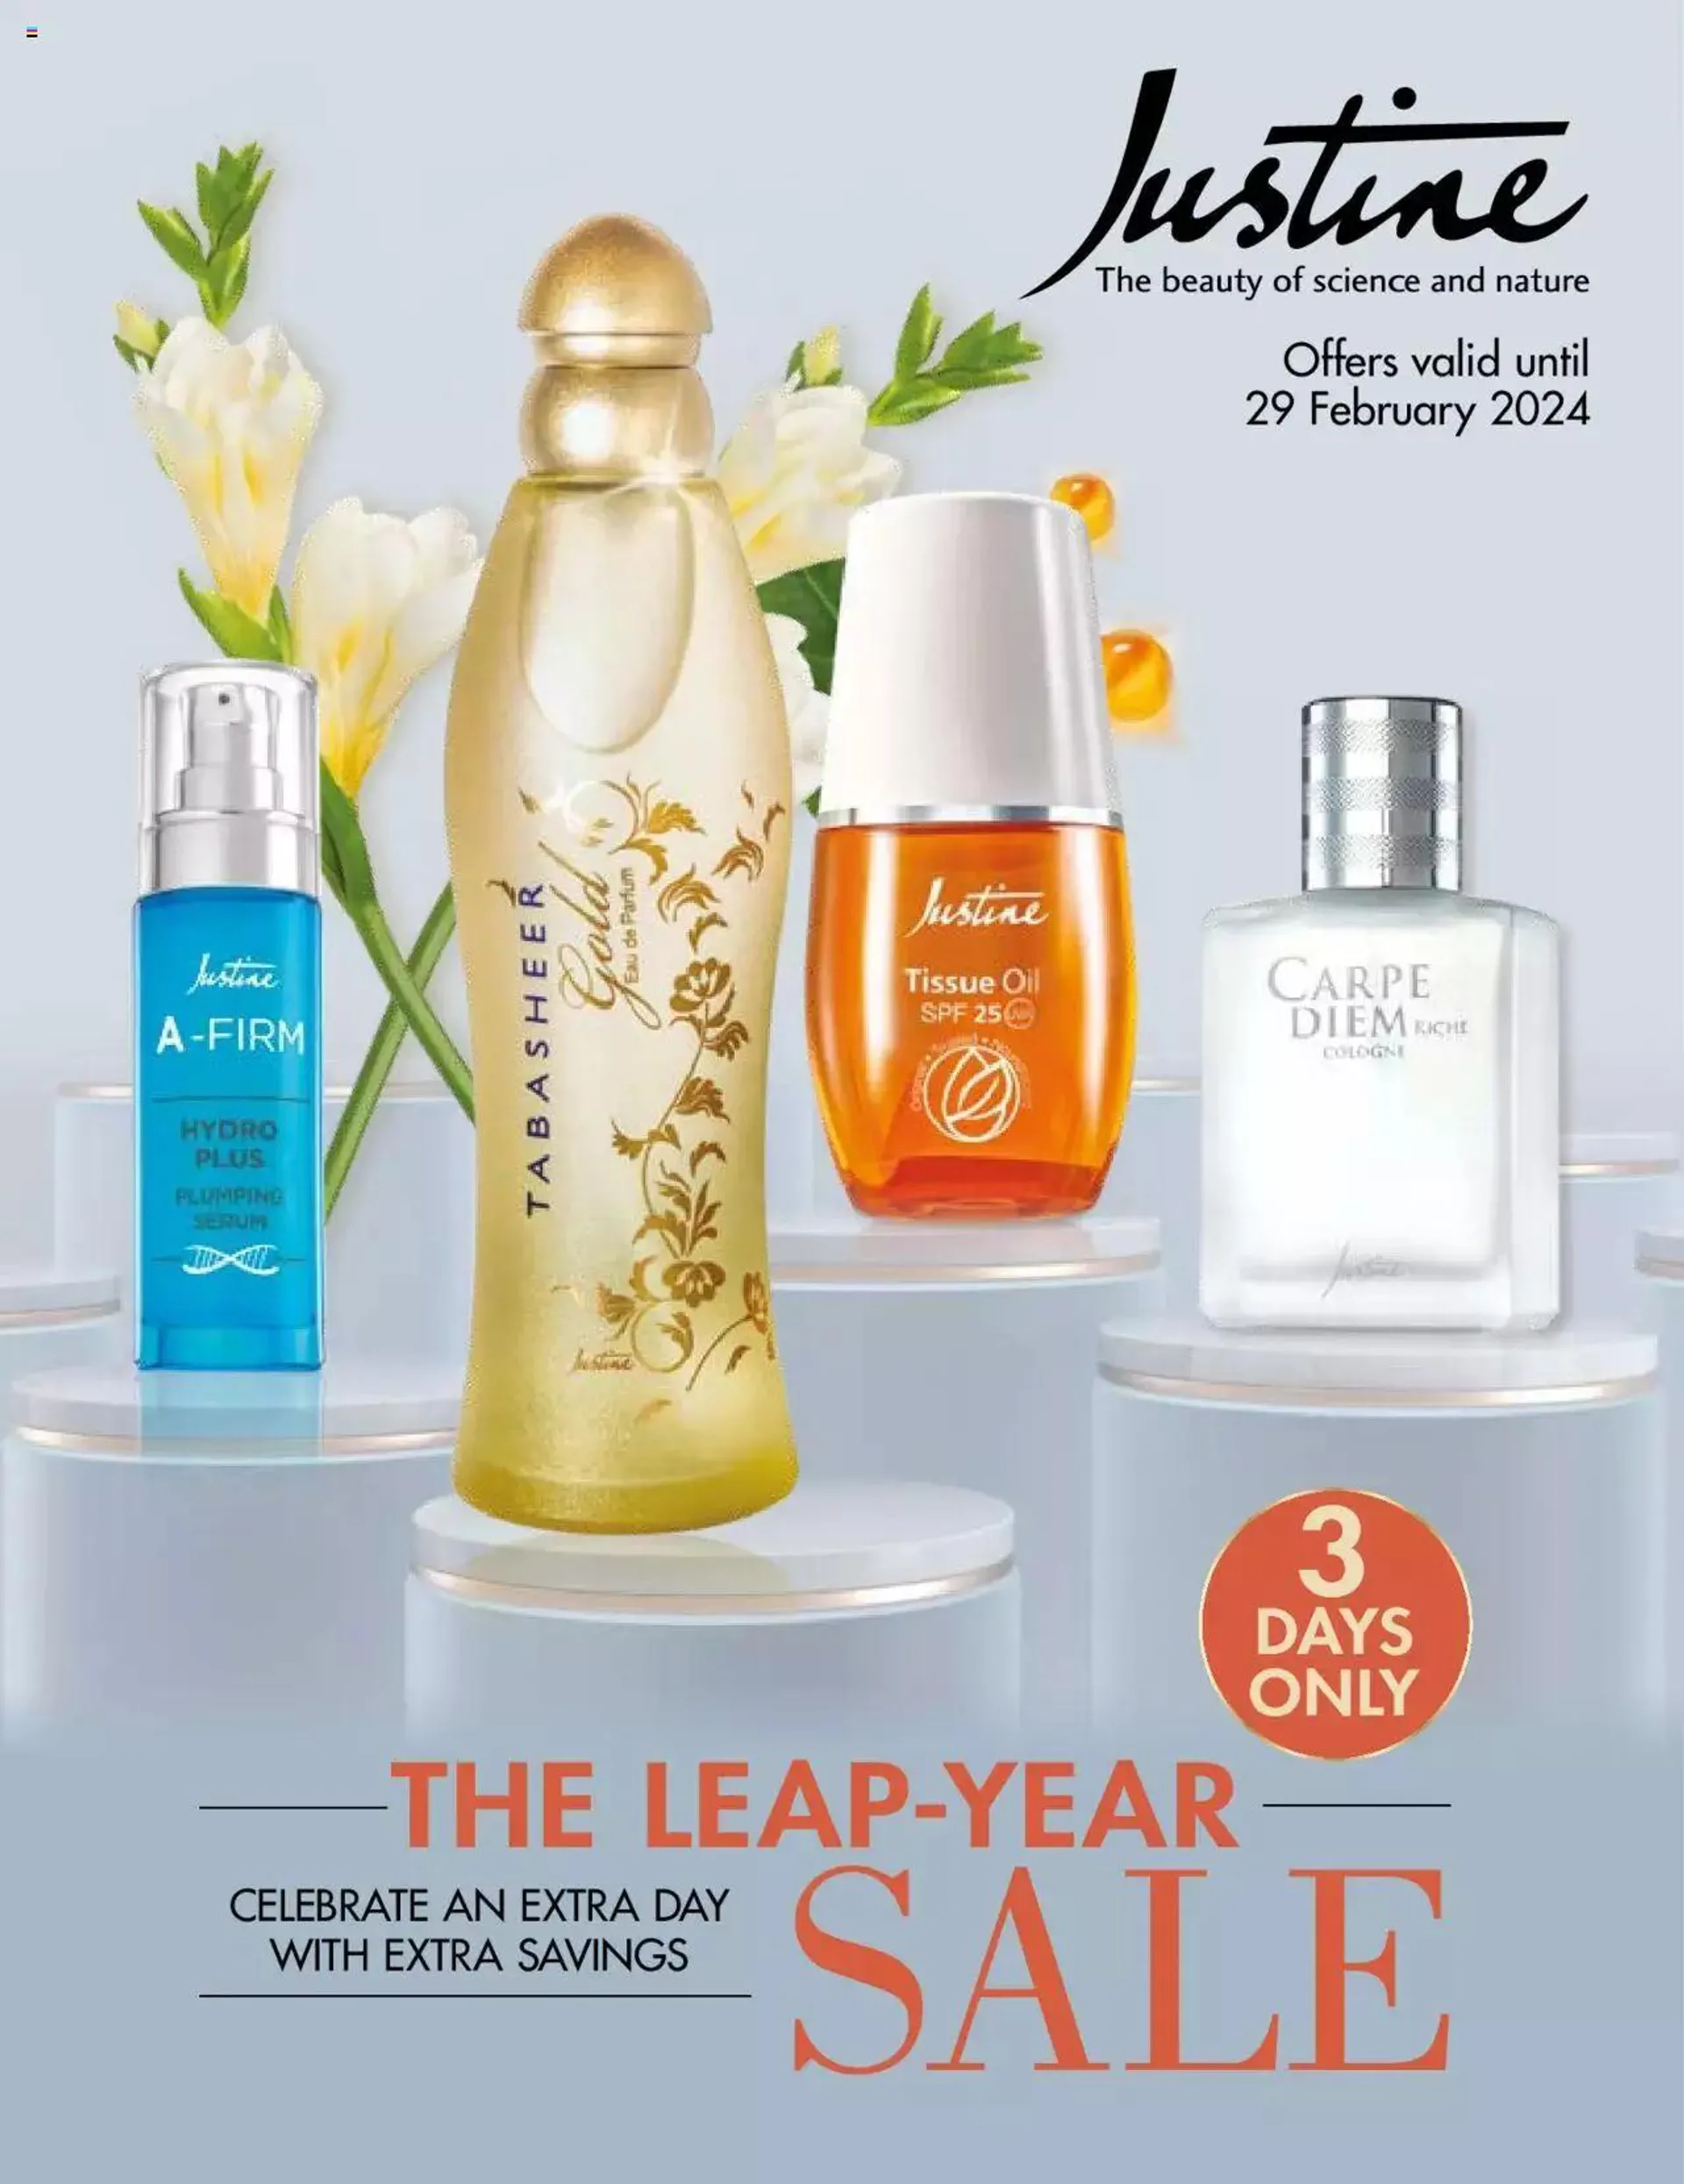 Justine - Leap Year Sale Deals - 26 February 29 February 2024